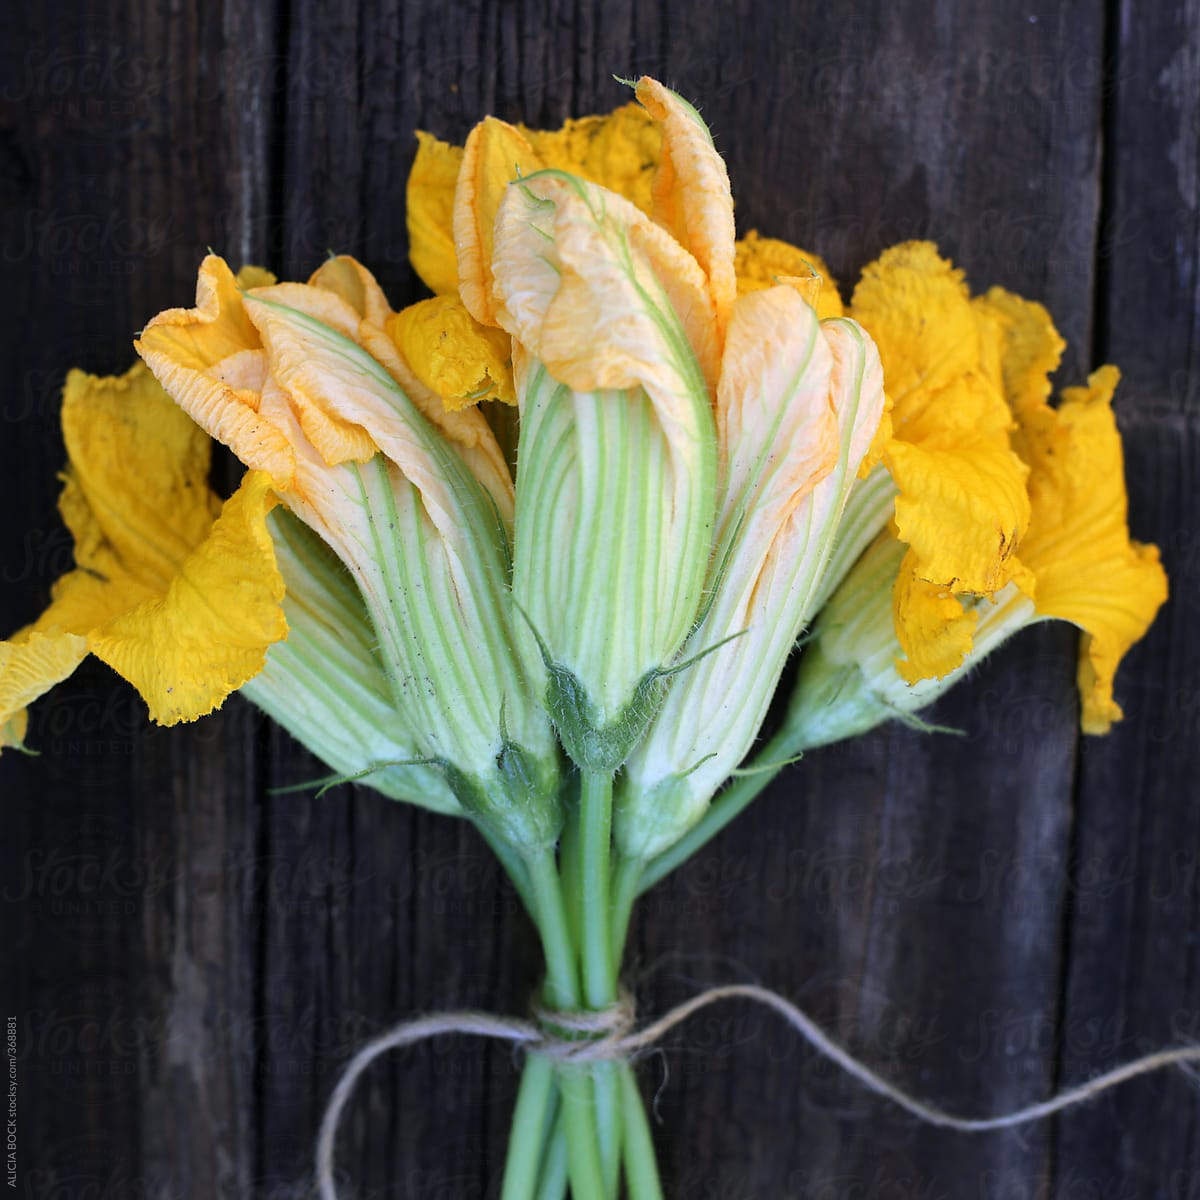 Vibrant Yellow Squash Blossom Freshly Picked From The Garden